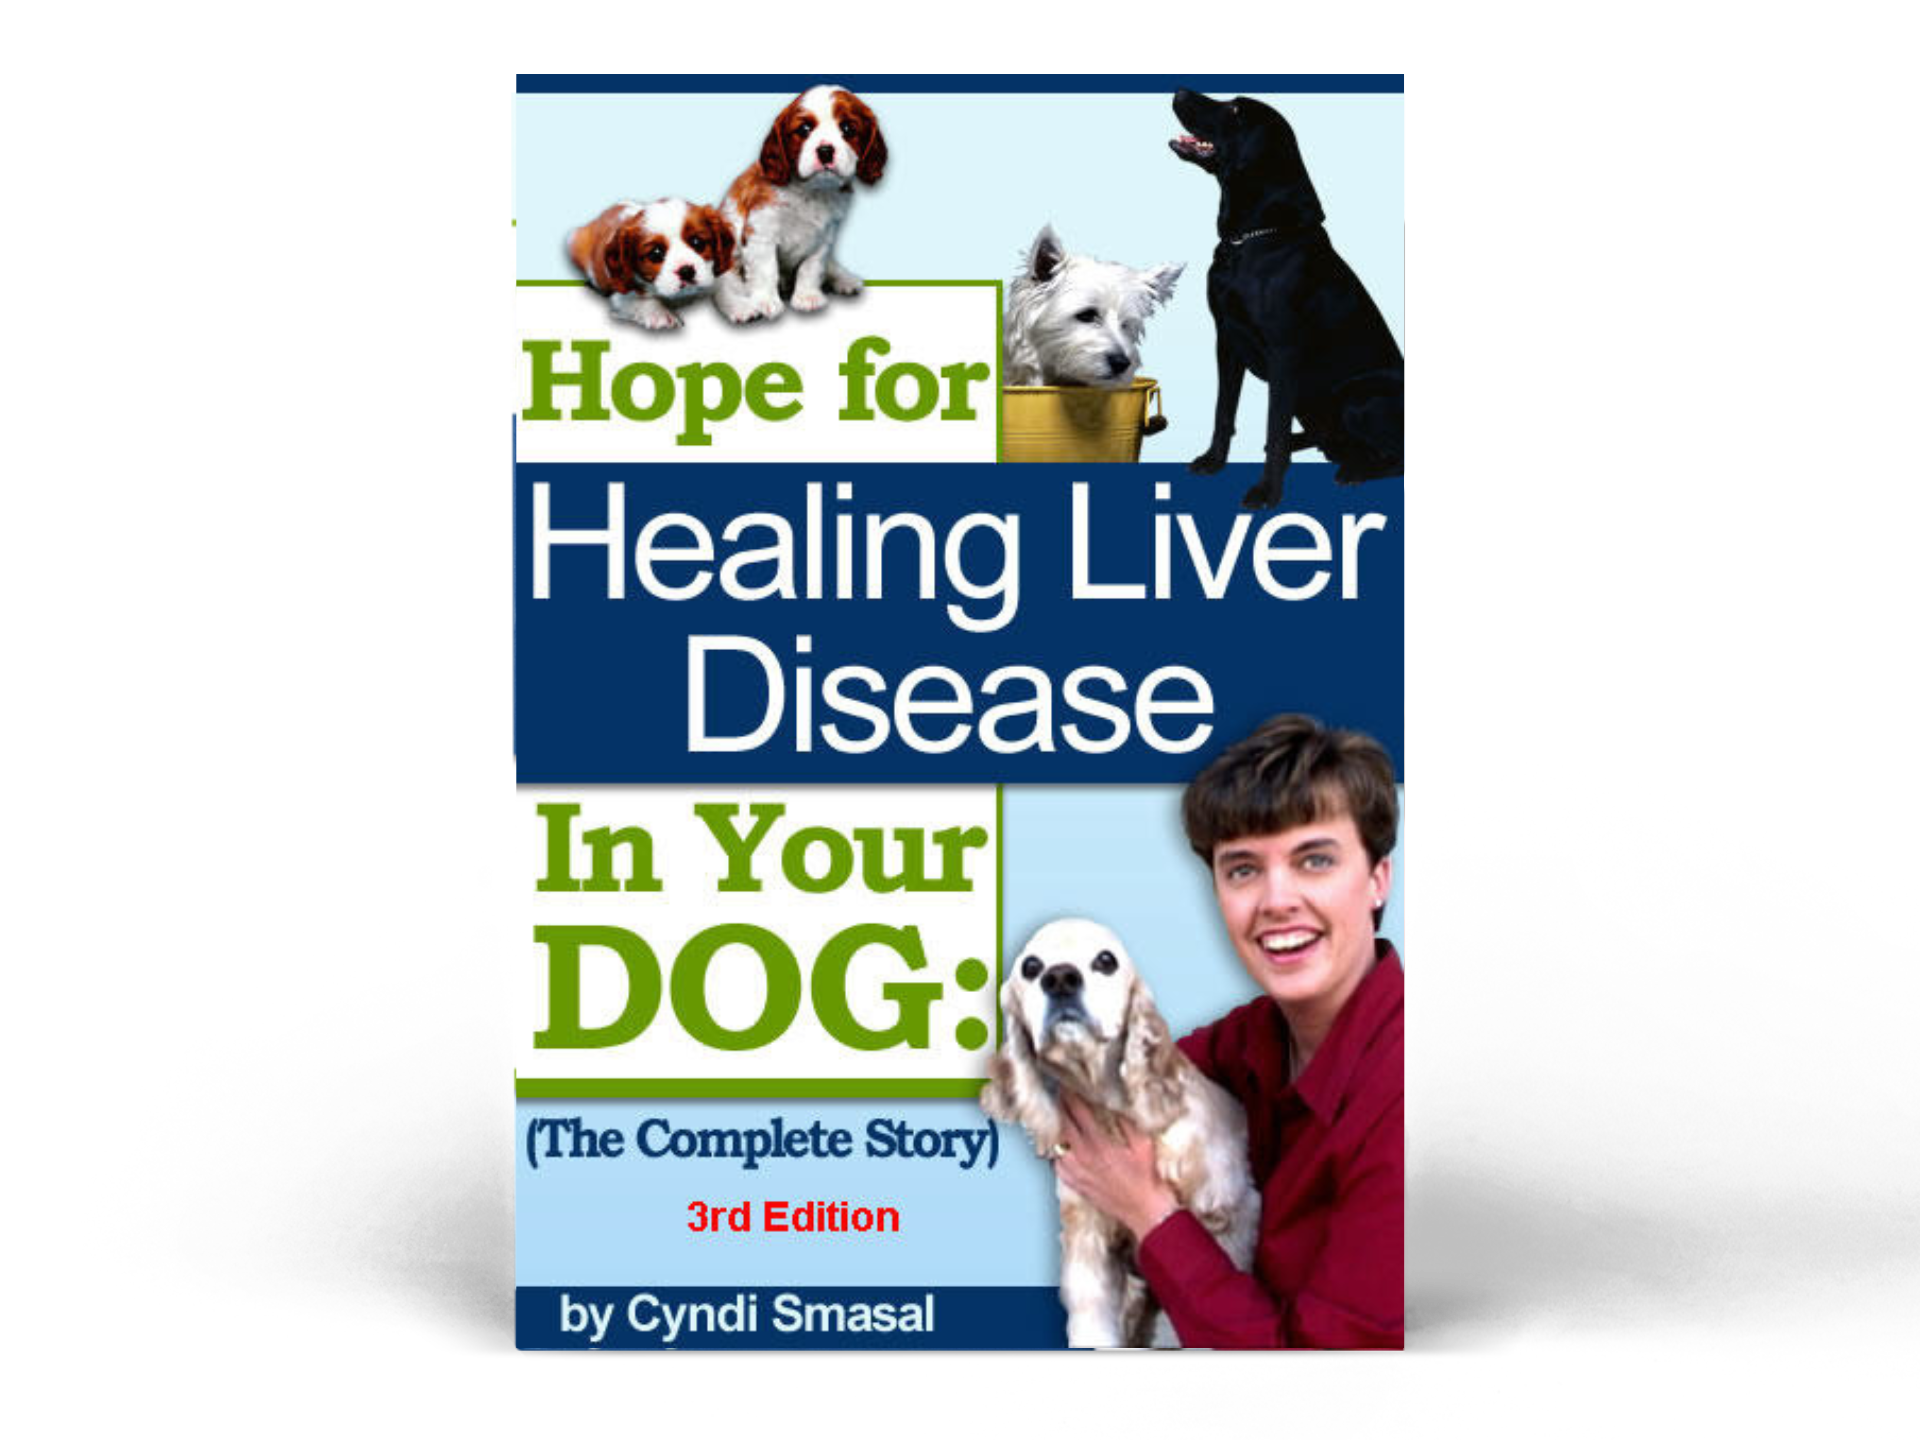 Hope For Healing Liver Disease in Your Dog Reviews